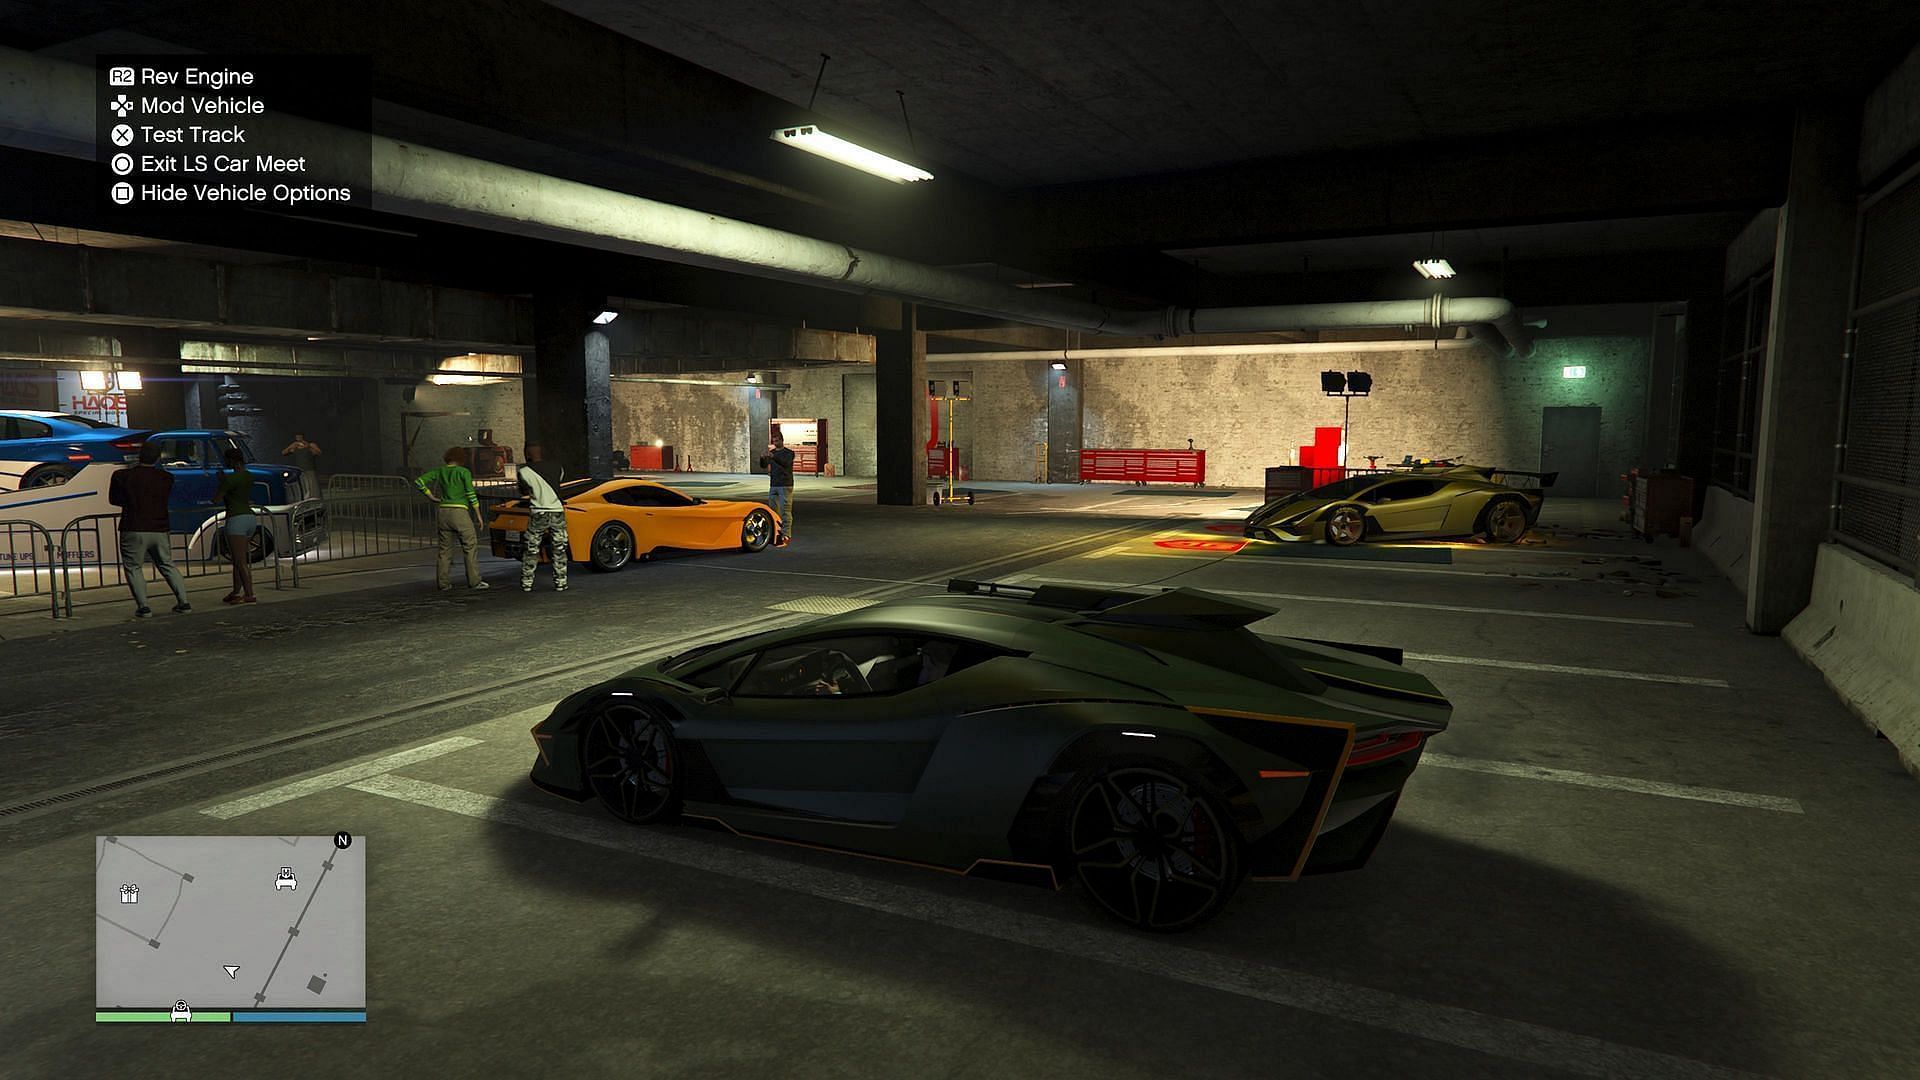 An example of a player getting ready to customize their ride (Image via Rockstar Games)